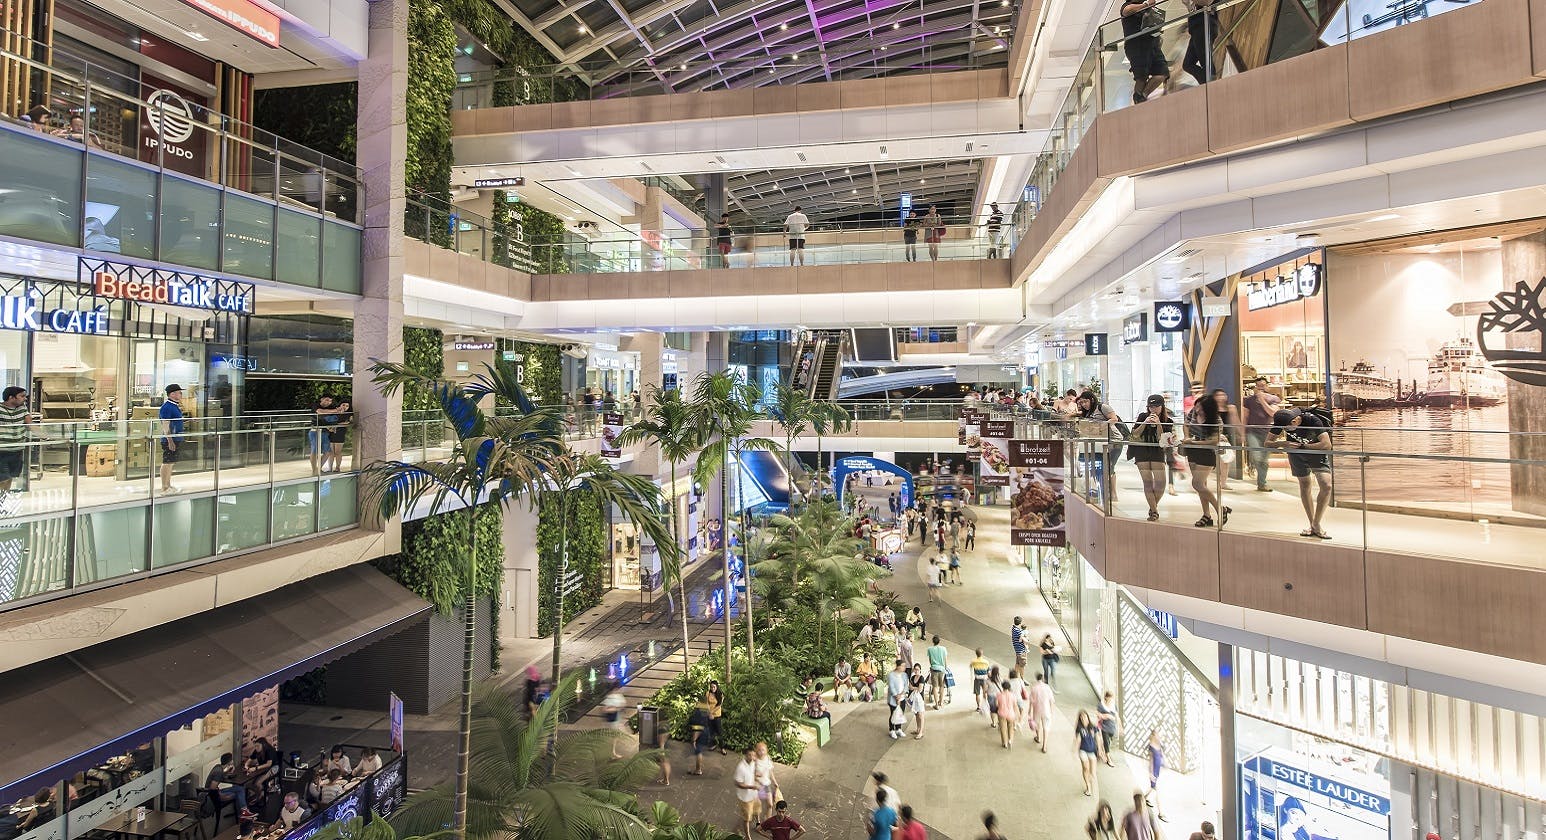 Interior of Westgate shopping mall